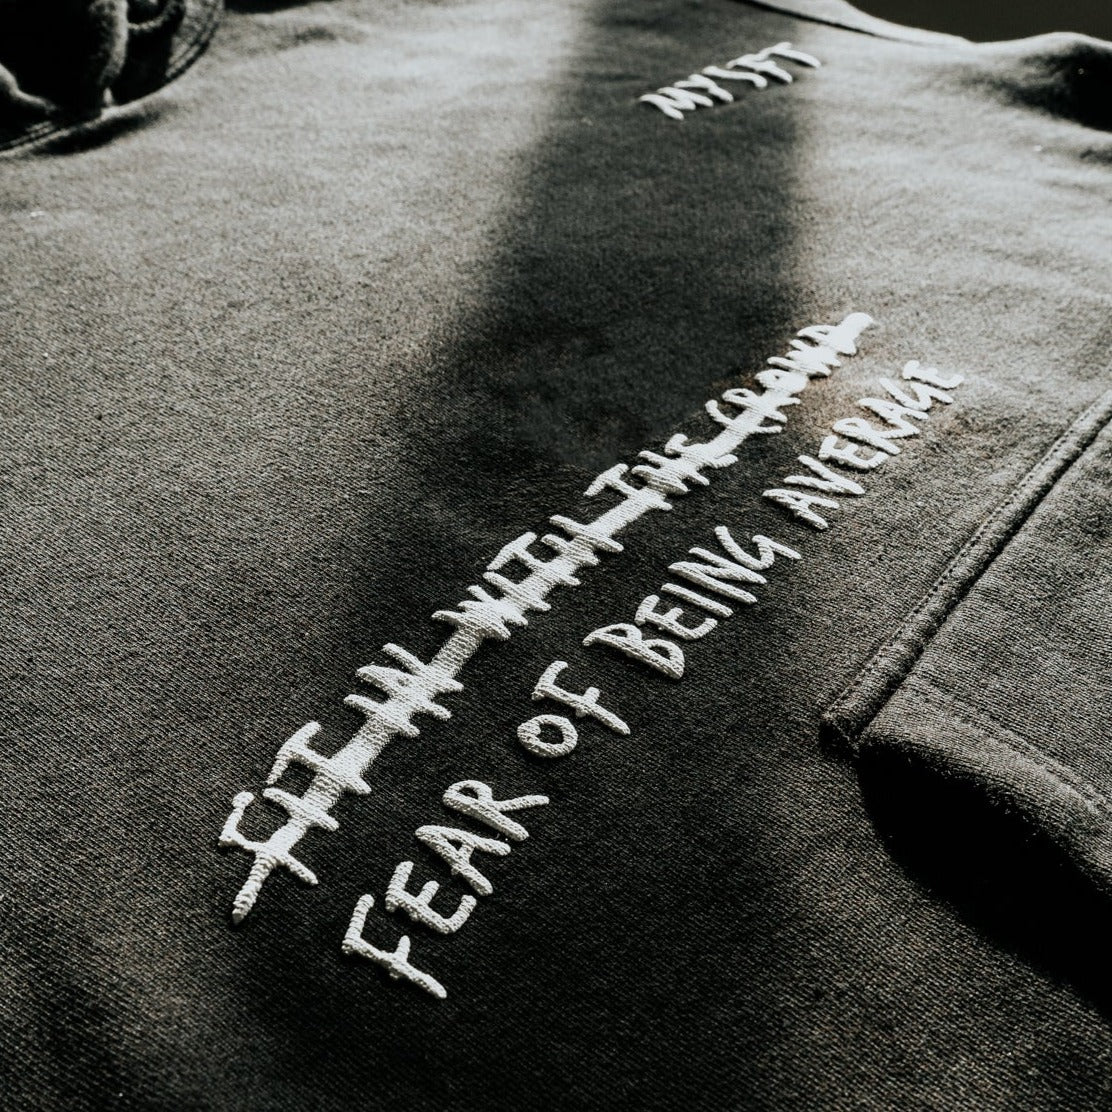 MYSFT® "FEAR OF BEING AVERAGE" HOODIE